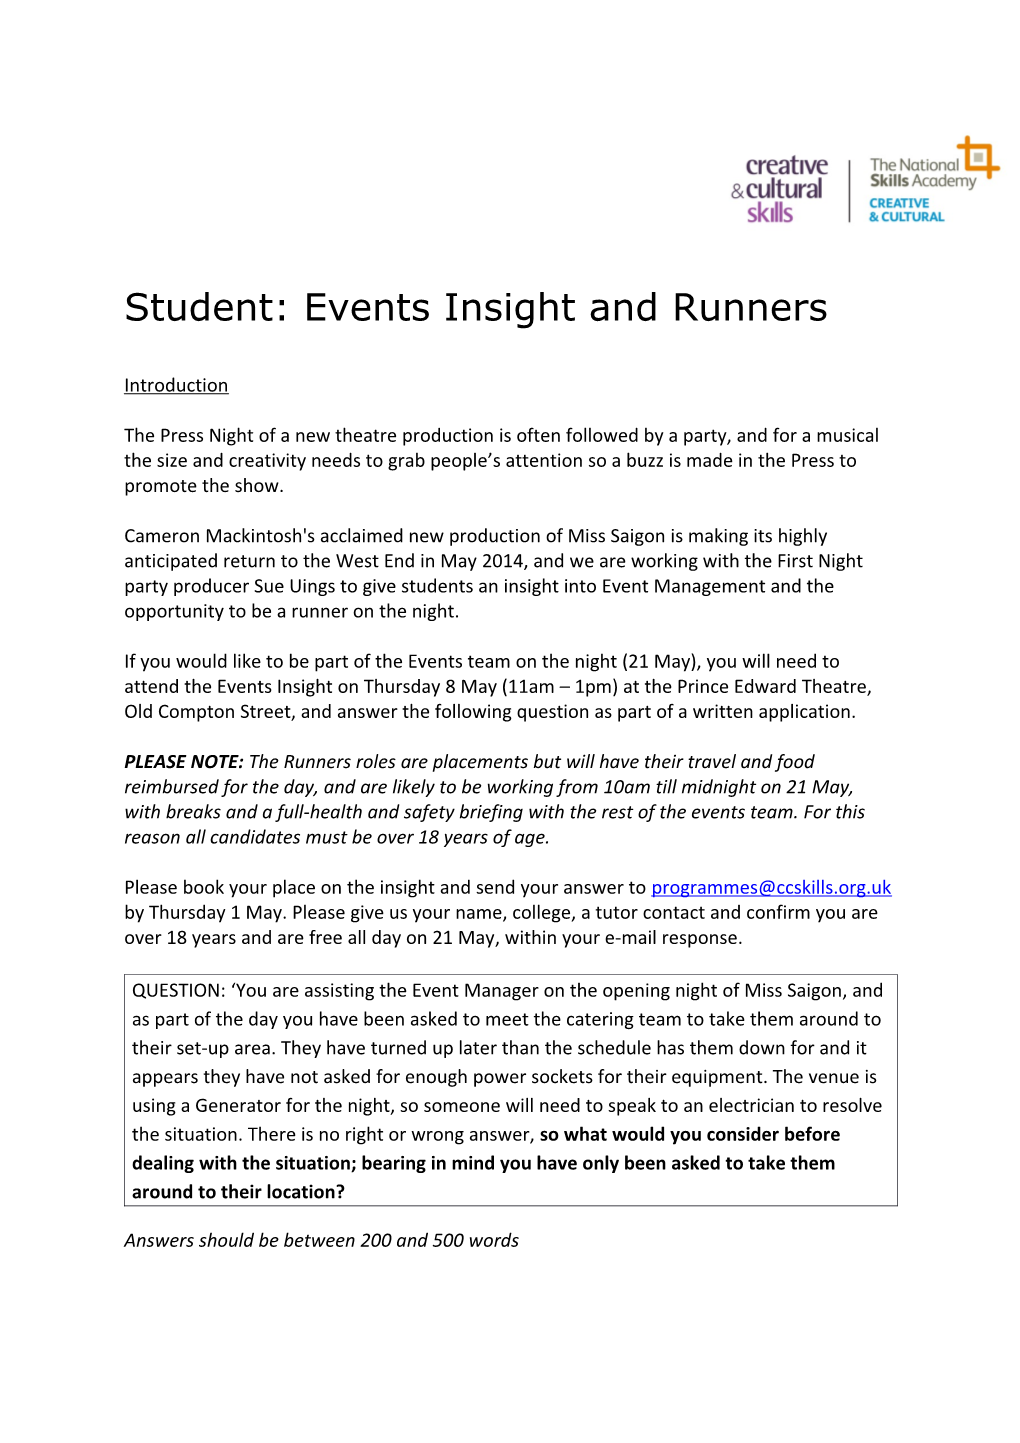 Student: Events Insight and Runners